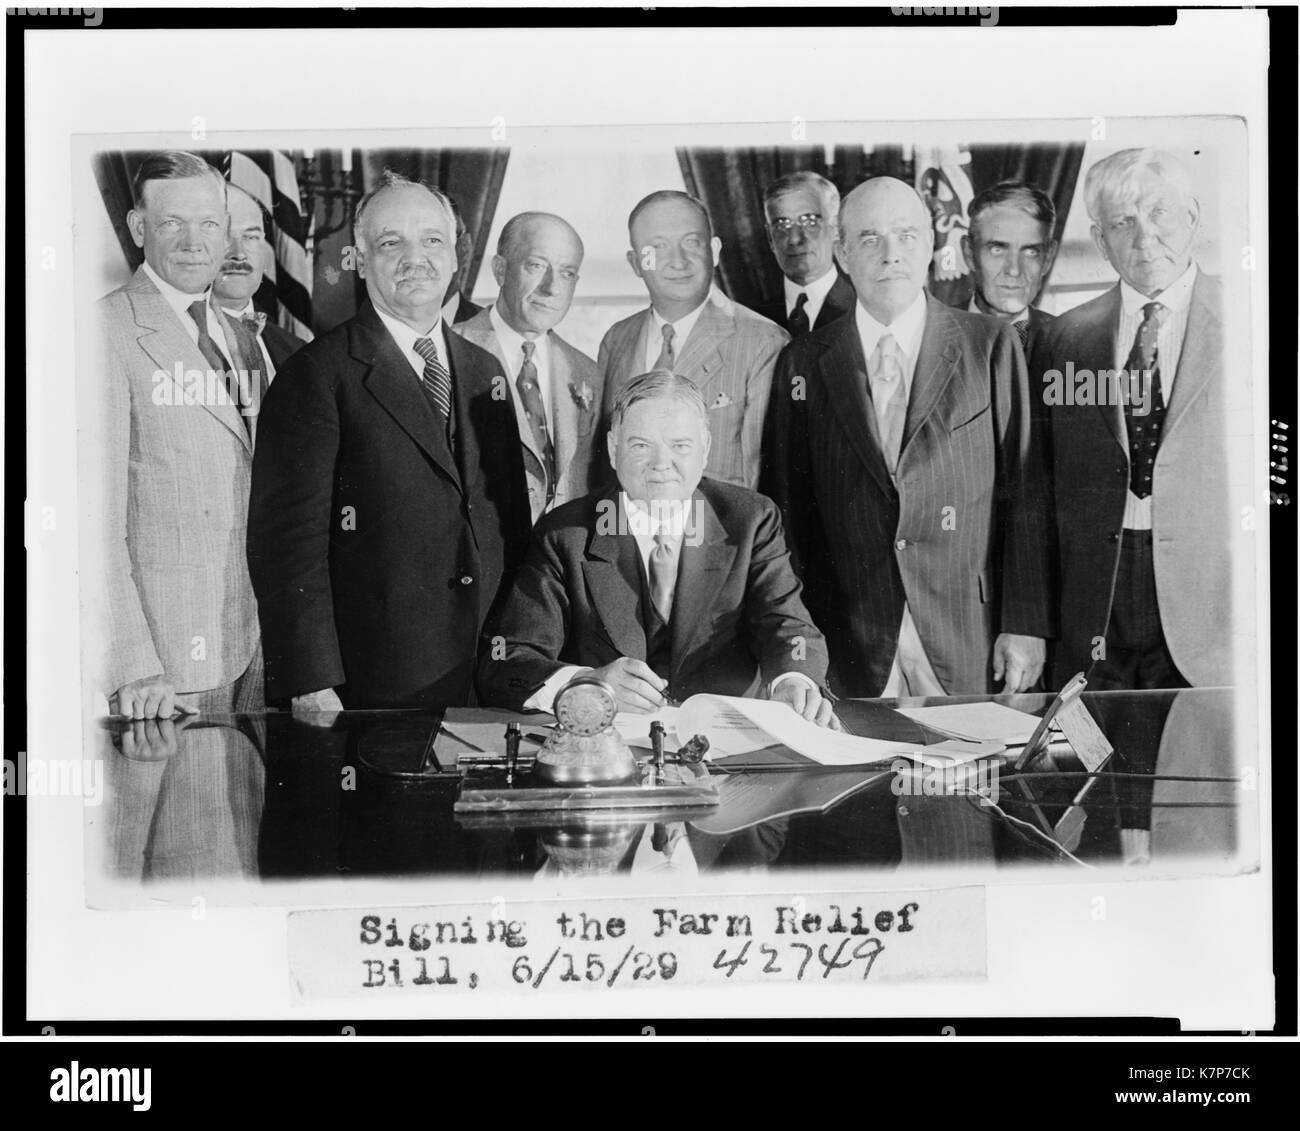 President Herbert Hoover (seated, center) signs the Farm Relief Bill into law, surrounded by Congressional leaders including Nicholas Longworth, Speaker of the House of Representatives, to Hoover's left, Washington, DC, 06/15/1929. Stock Photo